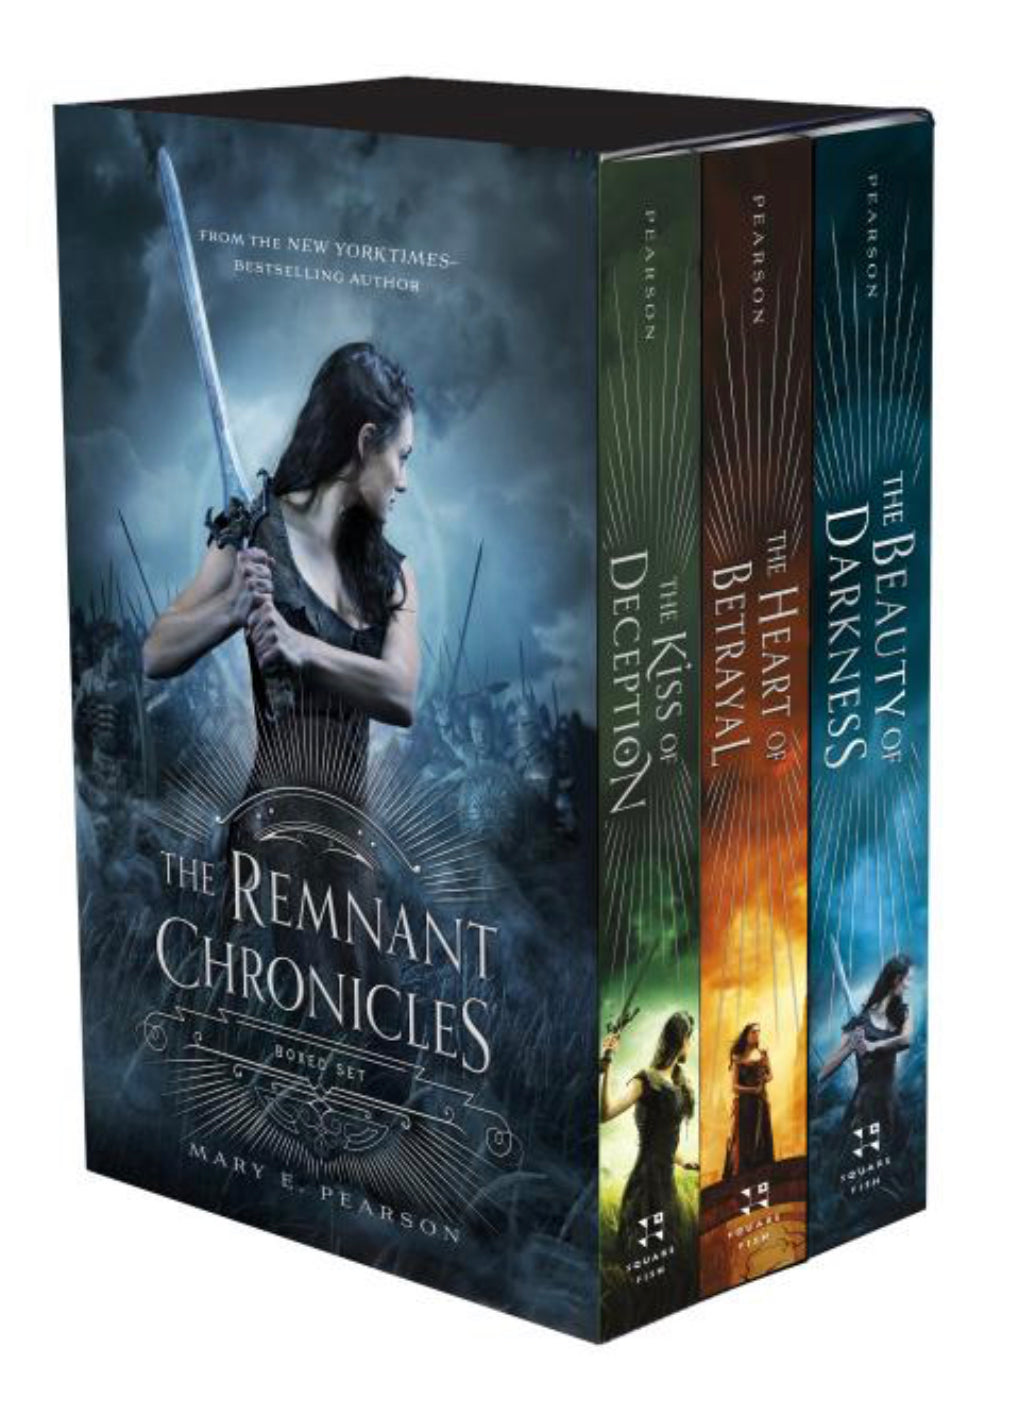 The Remnant Chronicles Box Set - Mary E. Pearson